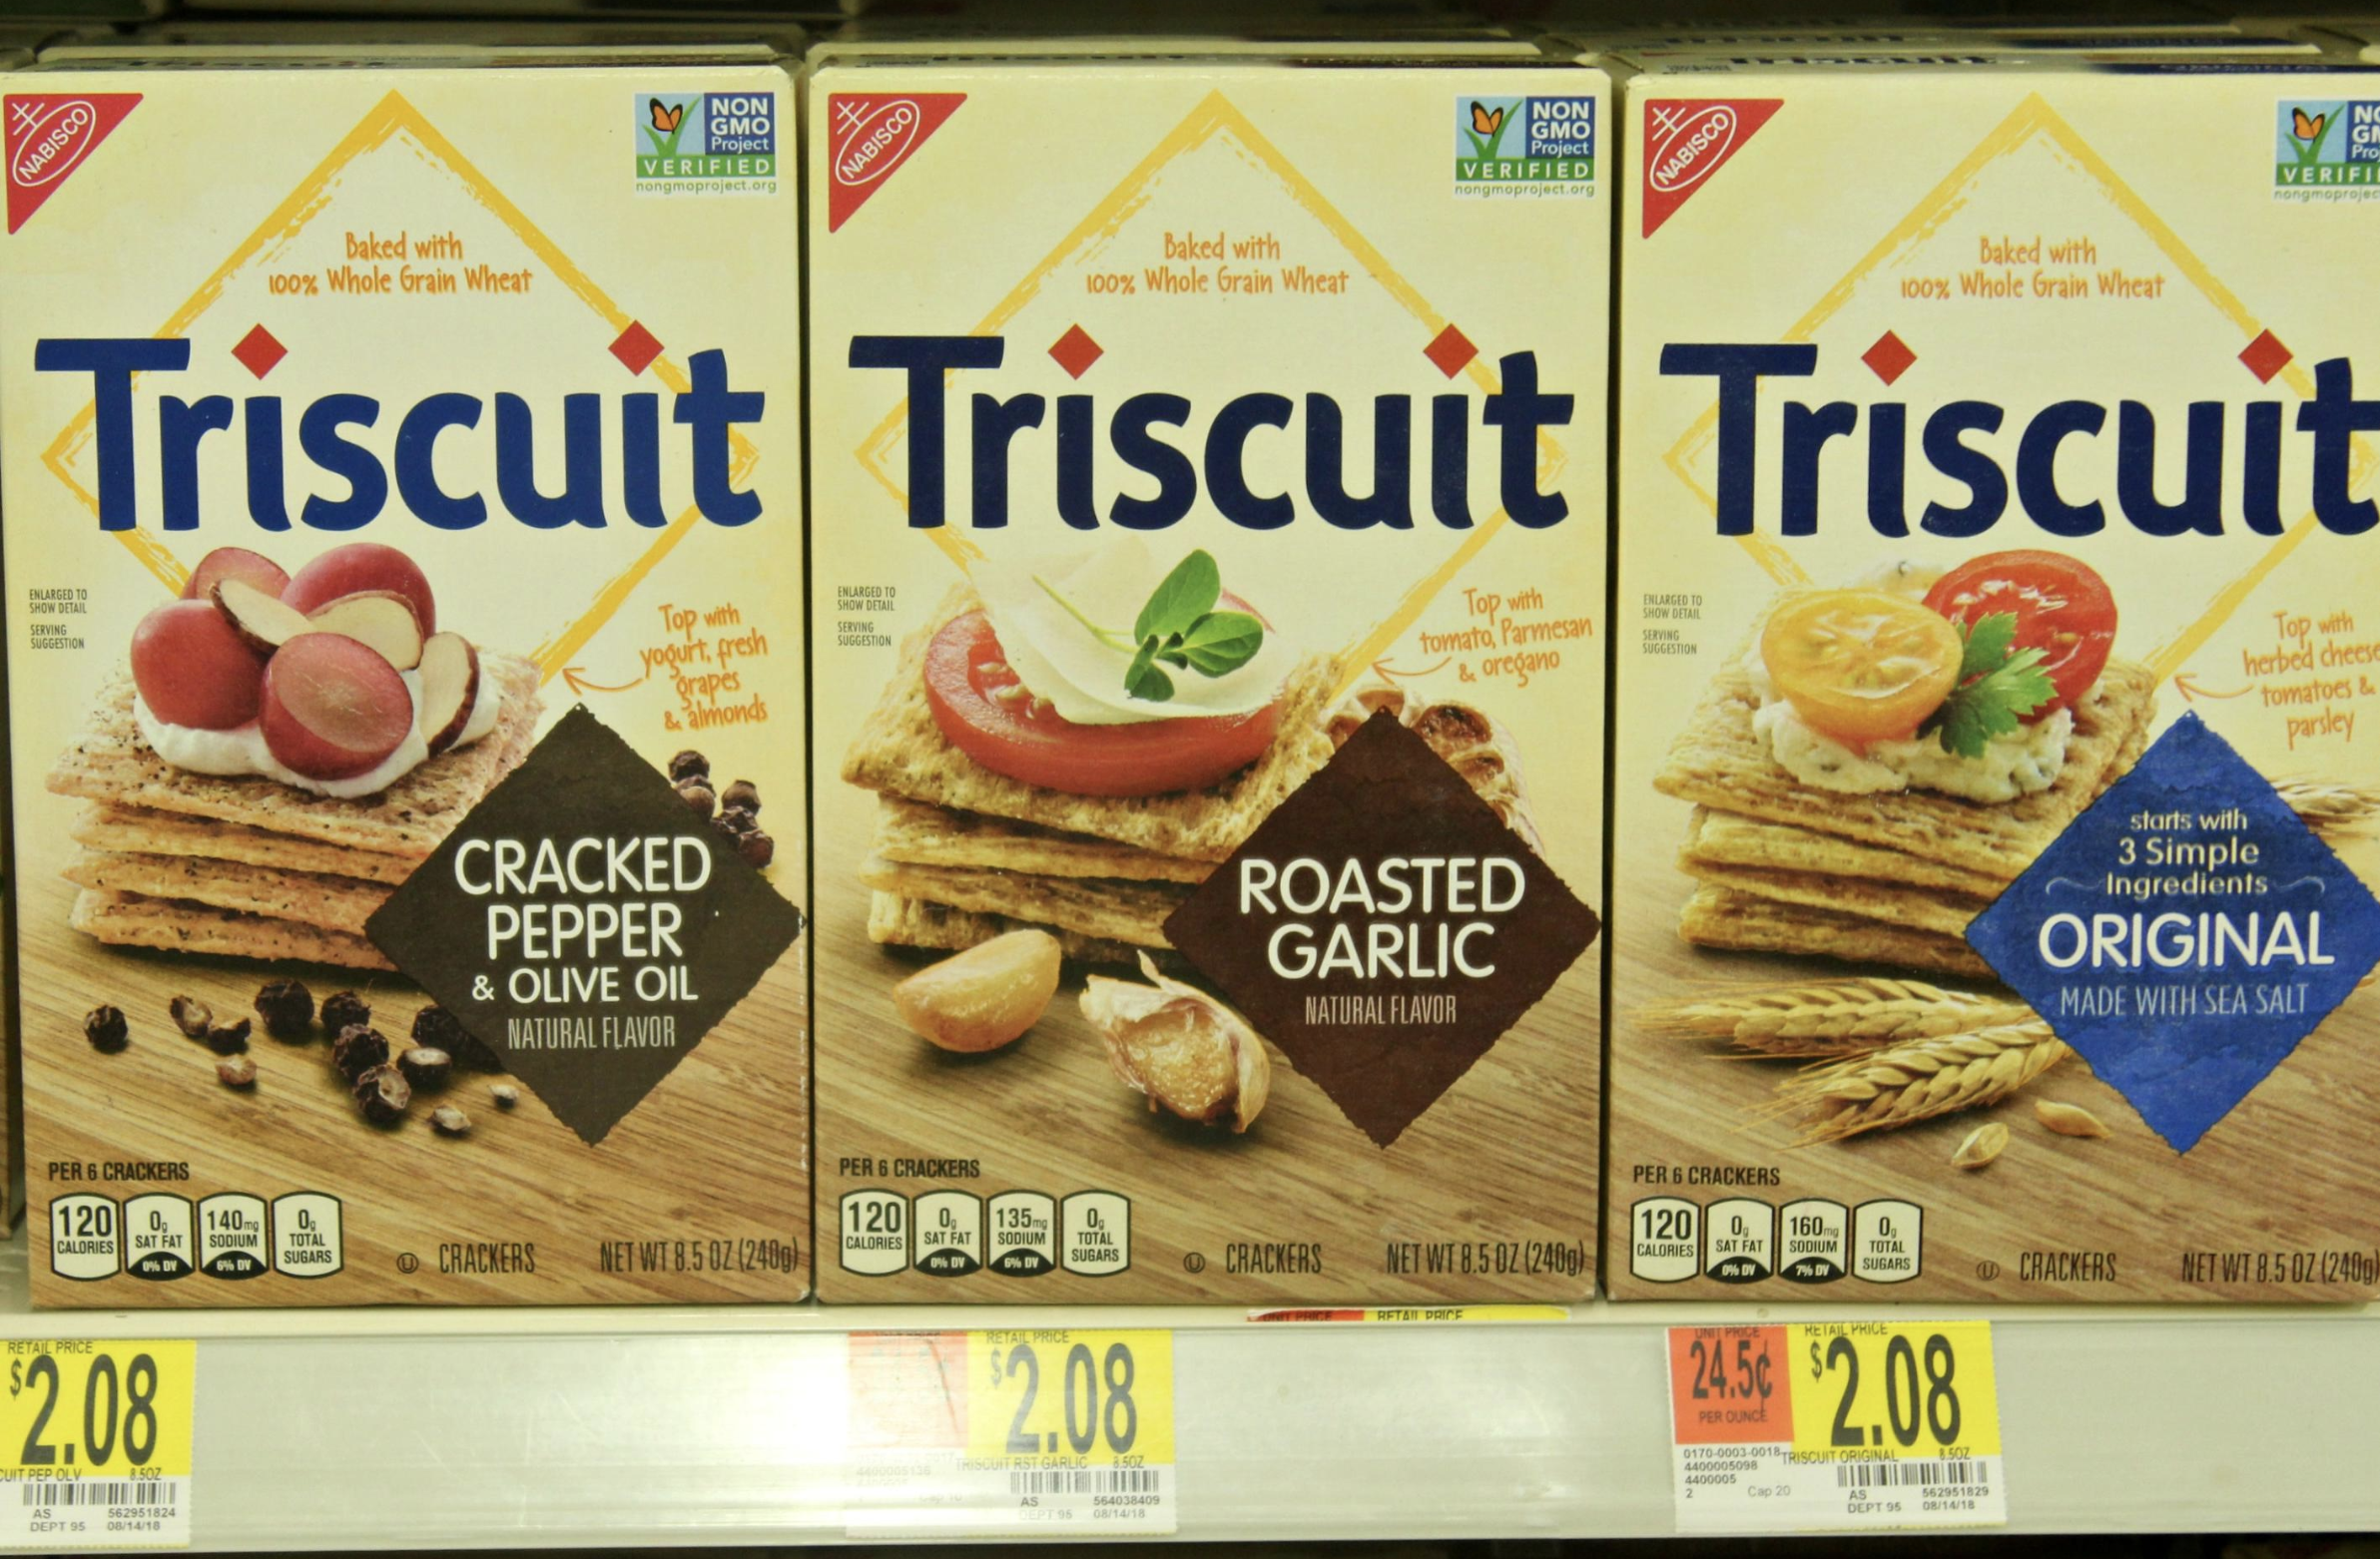 I love that Triscuit is baked with 100% Whole Grain Wheat and is now NON GMO. Pick up Triscuit at Walmart! #HolidaysWithTriscuit #IC #AD